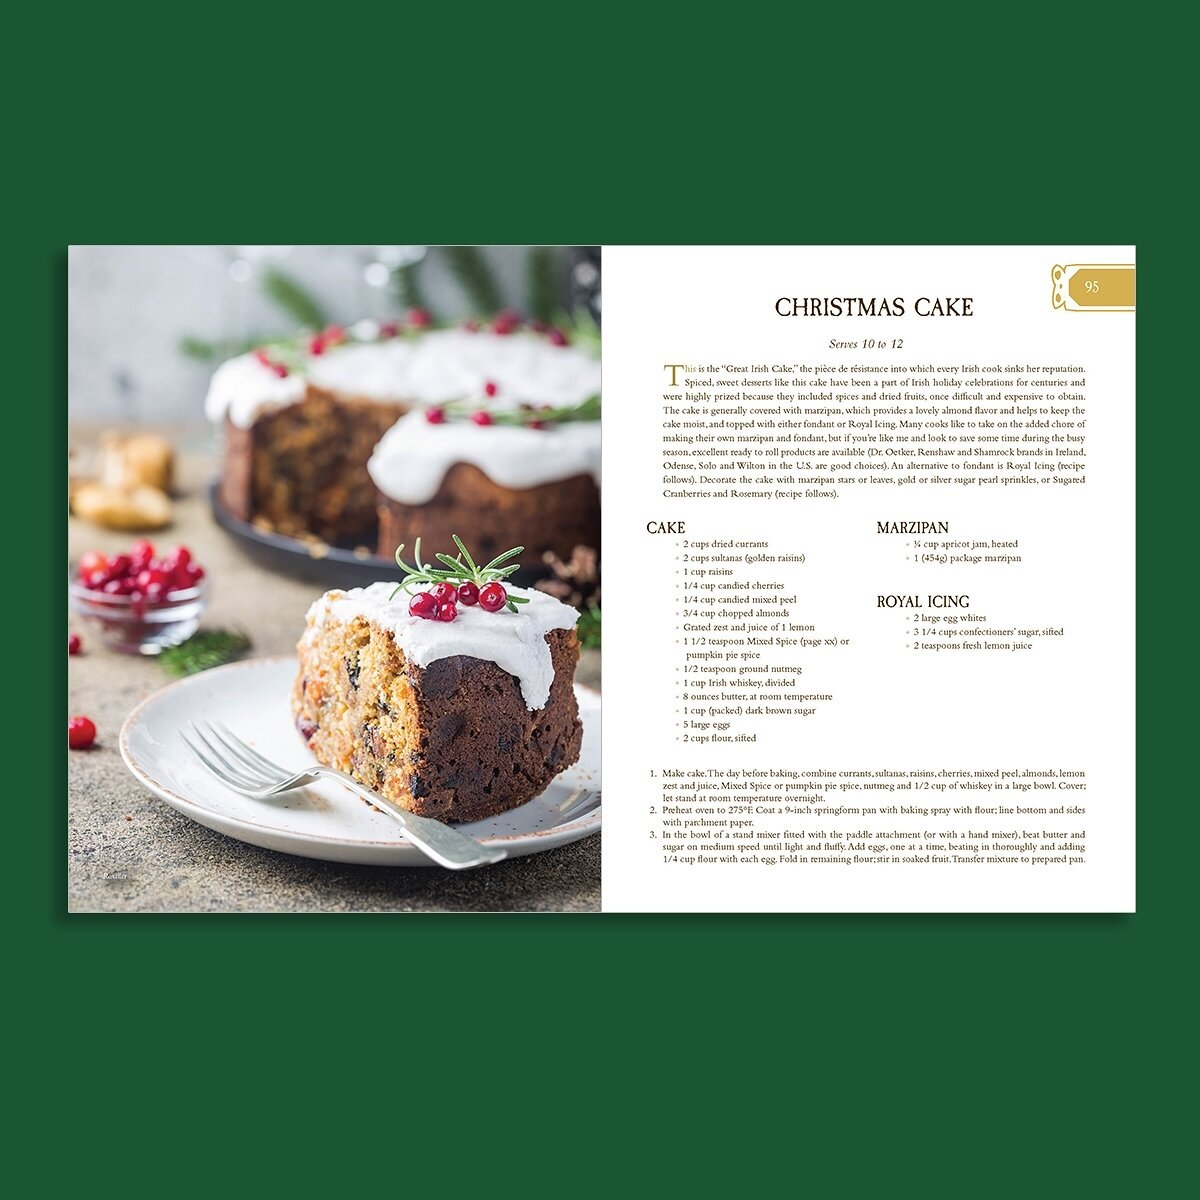 A festive cookbook I got to layout and typeset a while ago.

Festive Flavors of Ireland by Margaret M. Johnson

Interior Design: Christopher Aaron
Publisher: Ambassador International

#bookstagram #bookinteriordesign #cookbook #bookdesigns #beautiful